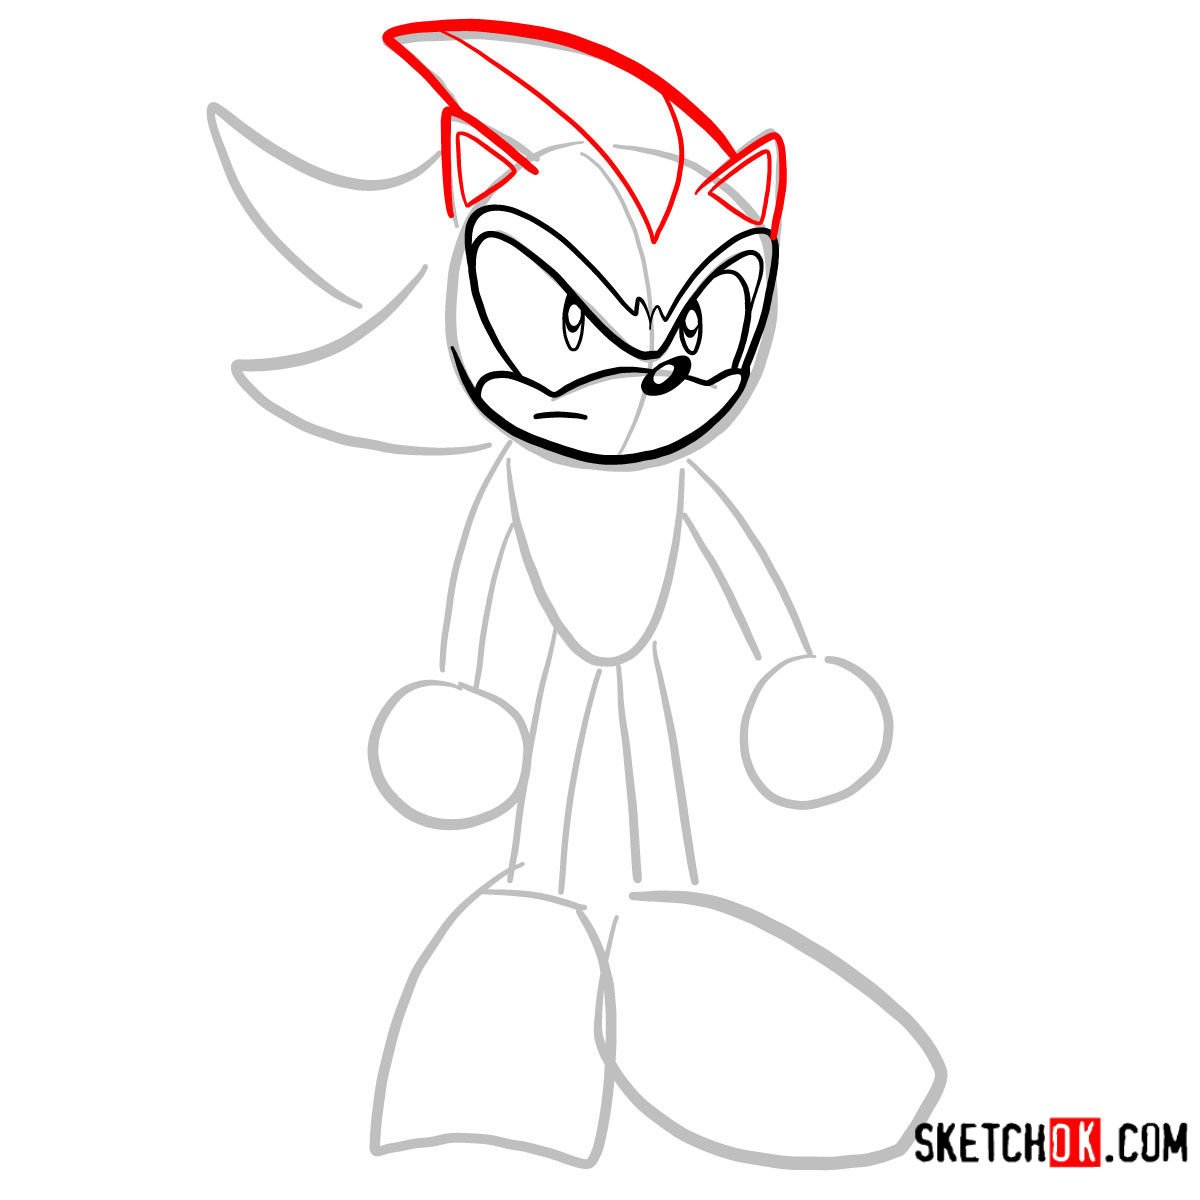 How to draw Shadow the Hedgehog - step 04